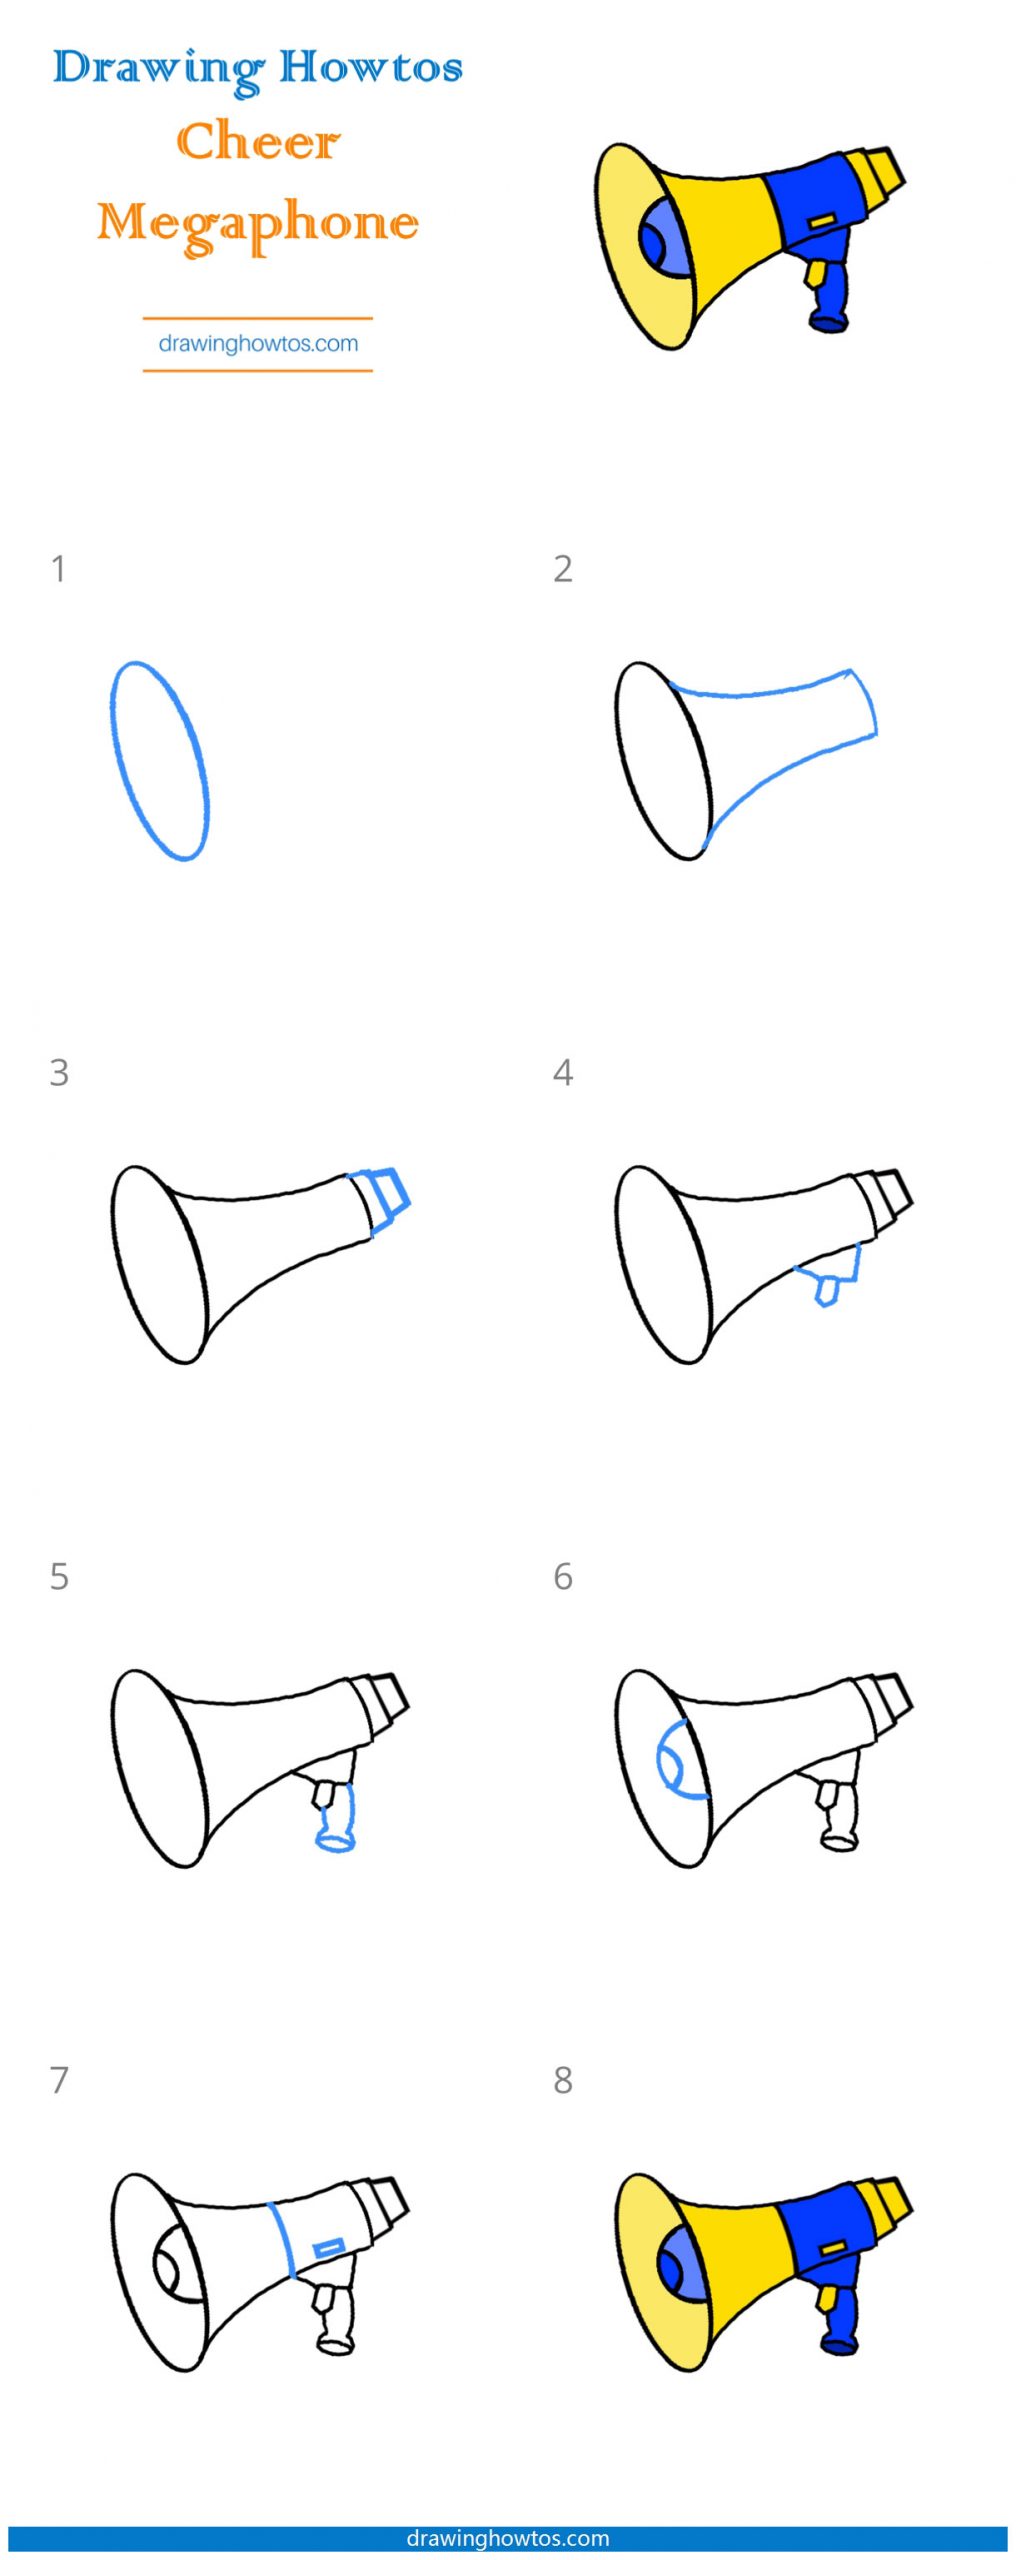 How to Draw an Electric Megaphone Step by Step